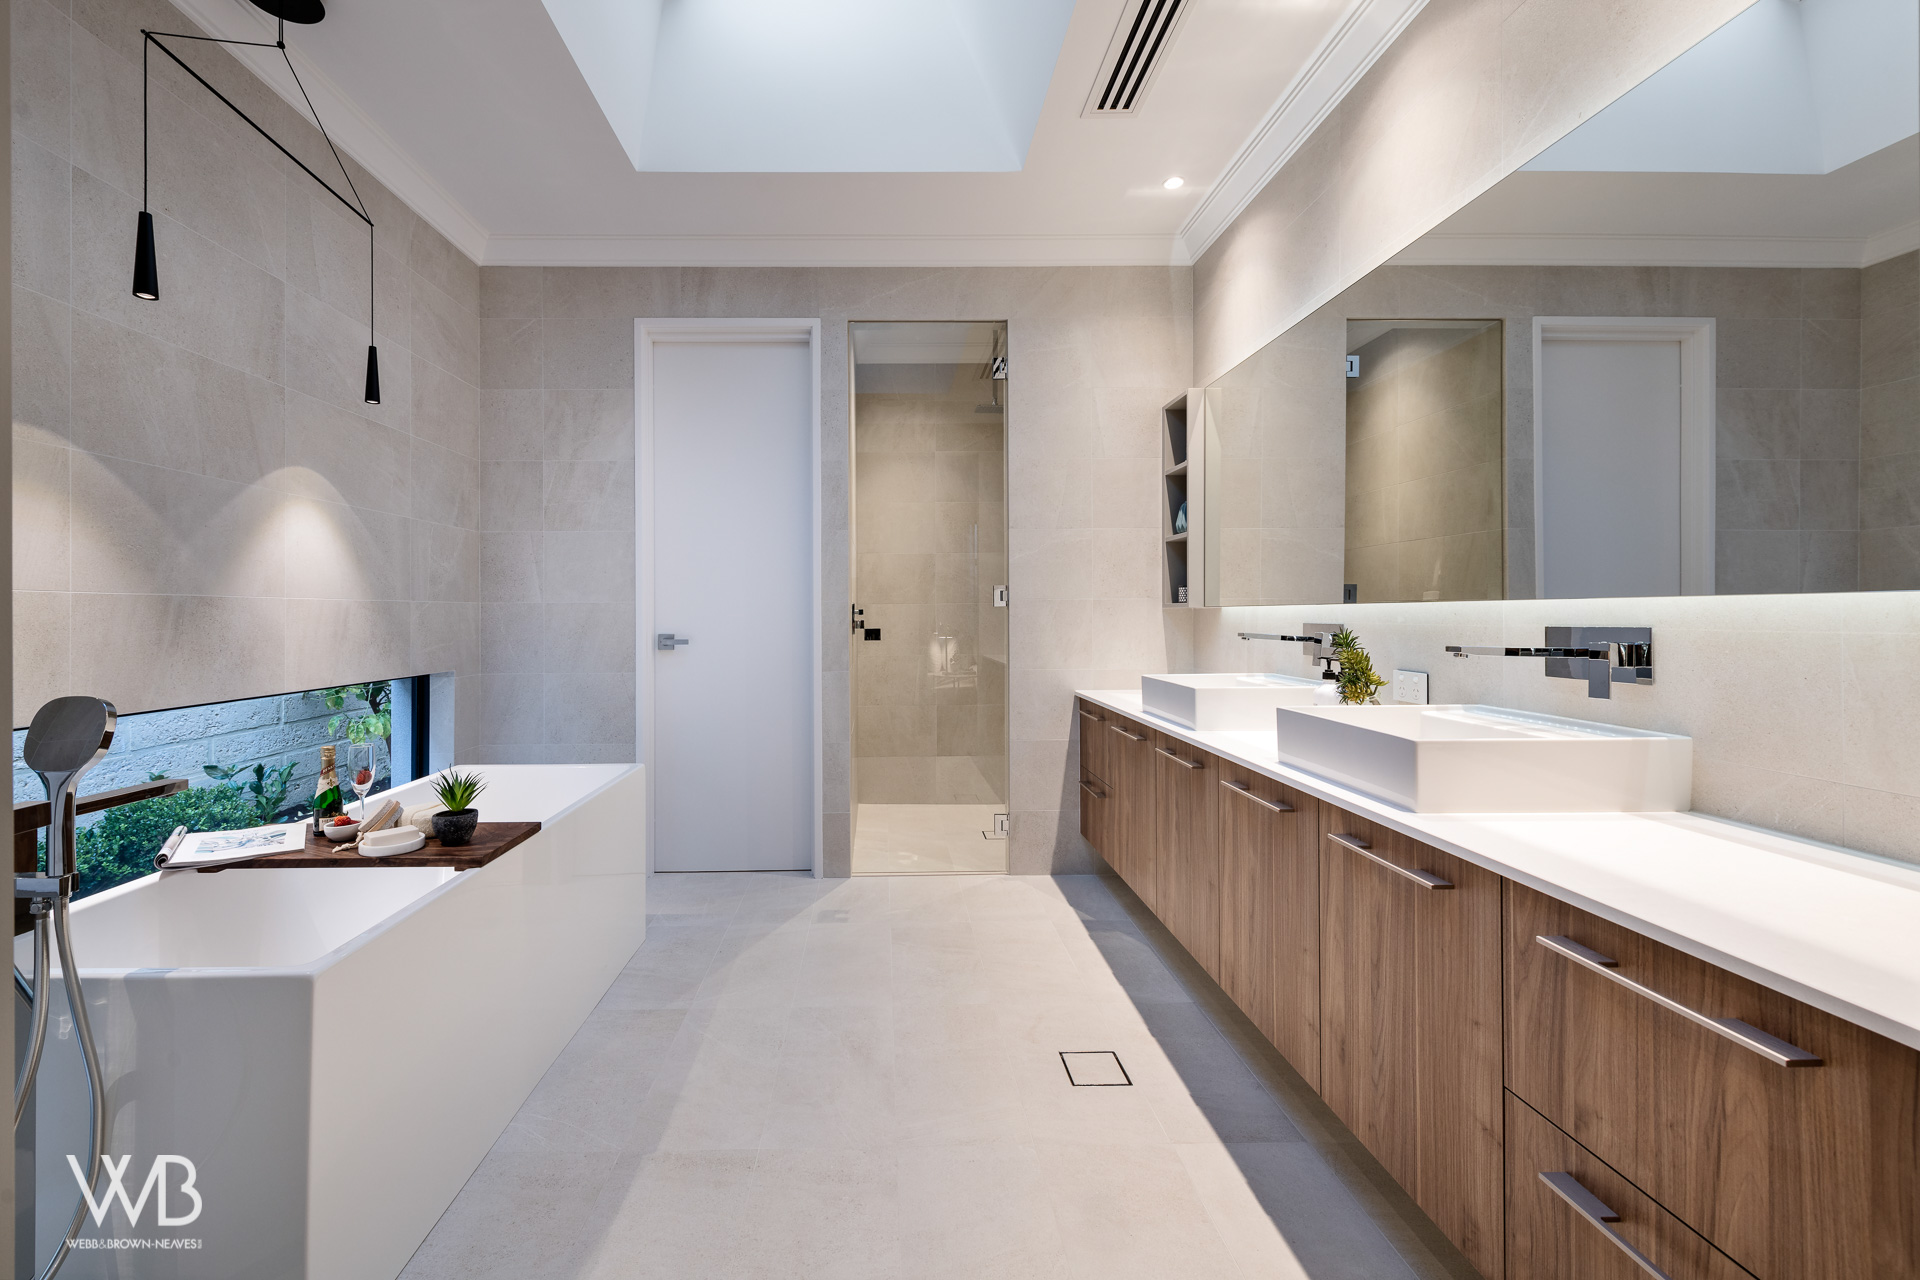  Bathroom designed by Jess O’Shea Designs for Webb and Brown-Neaves. Moda Display home. Made by The Maker Designer Kitchens. Dianella, Perth, Western Australia 